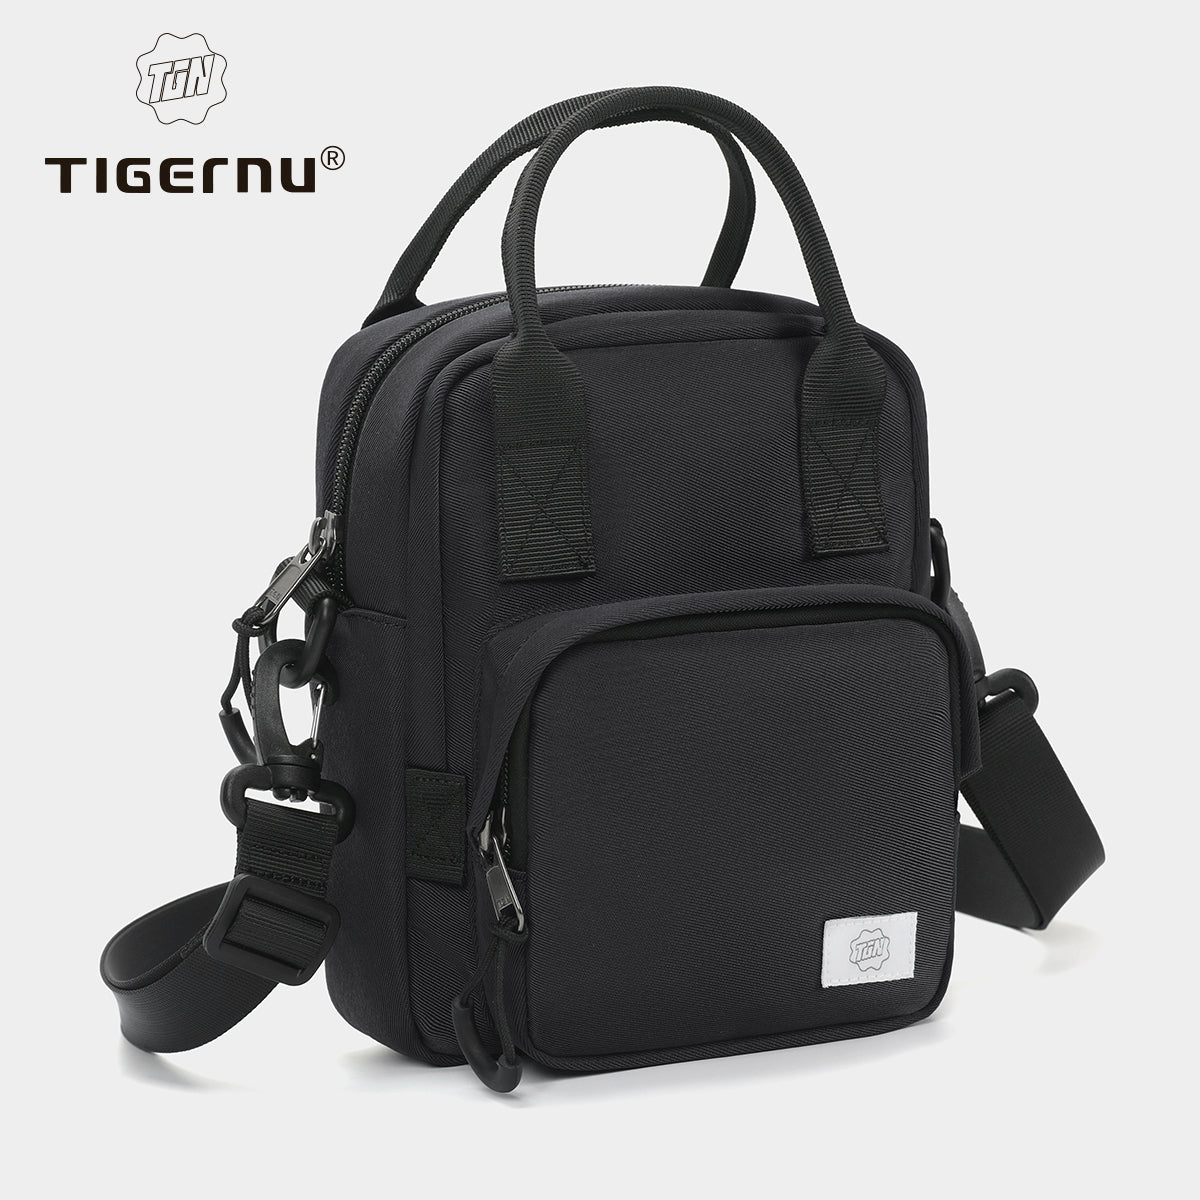 Tigernu T-S8668 waterproof leisure cell phone mobile bag daypack nylon casual sling bag for women girl